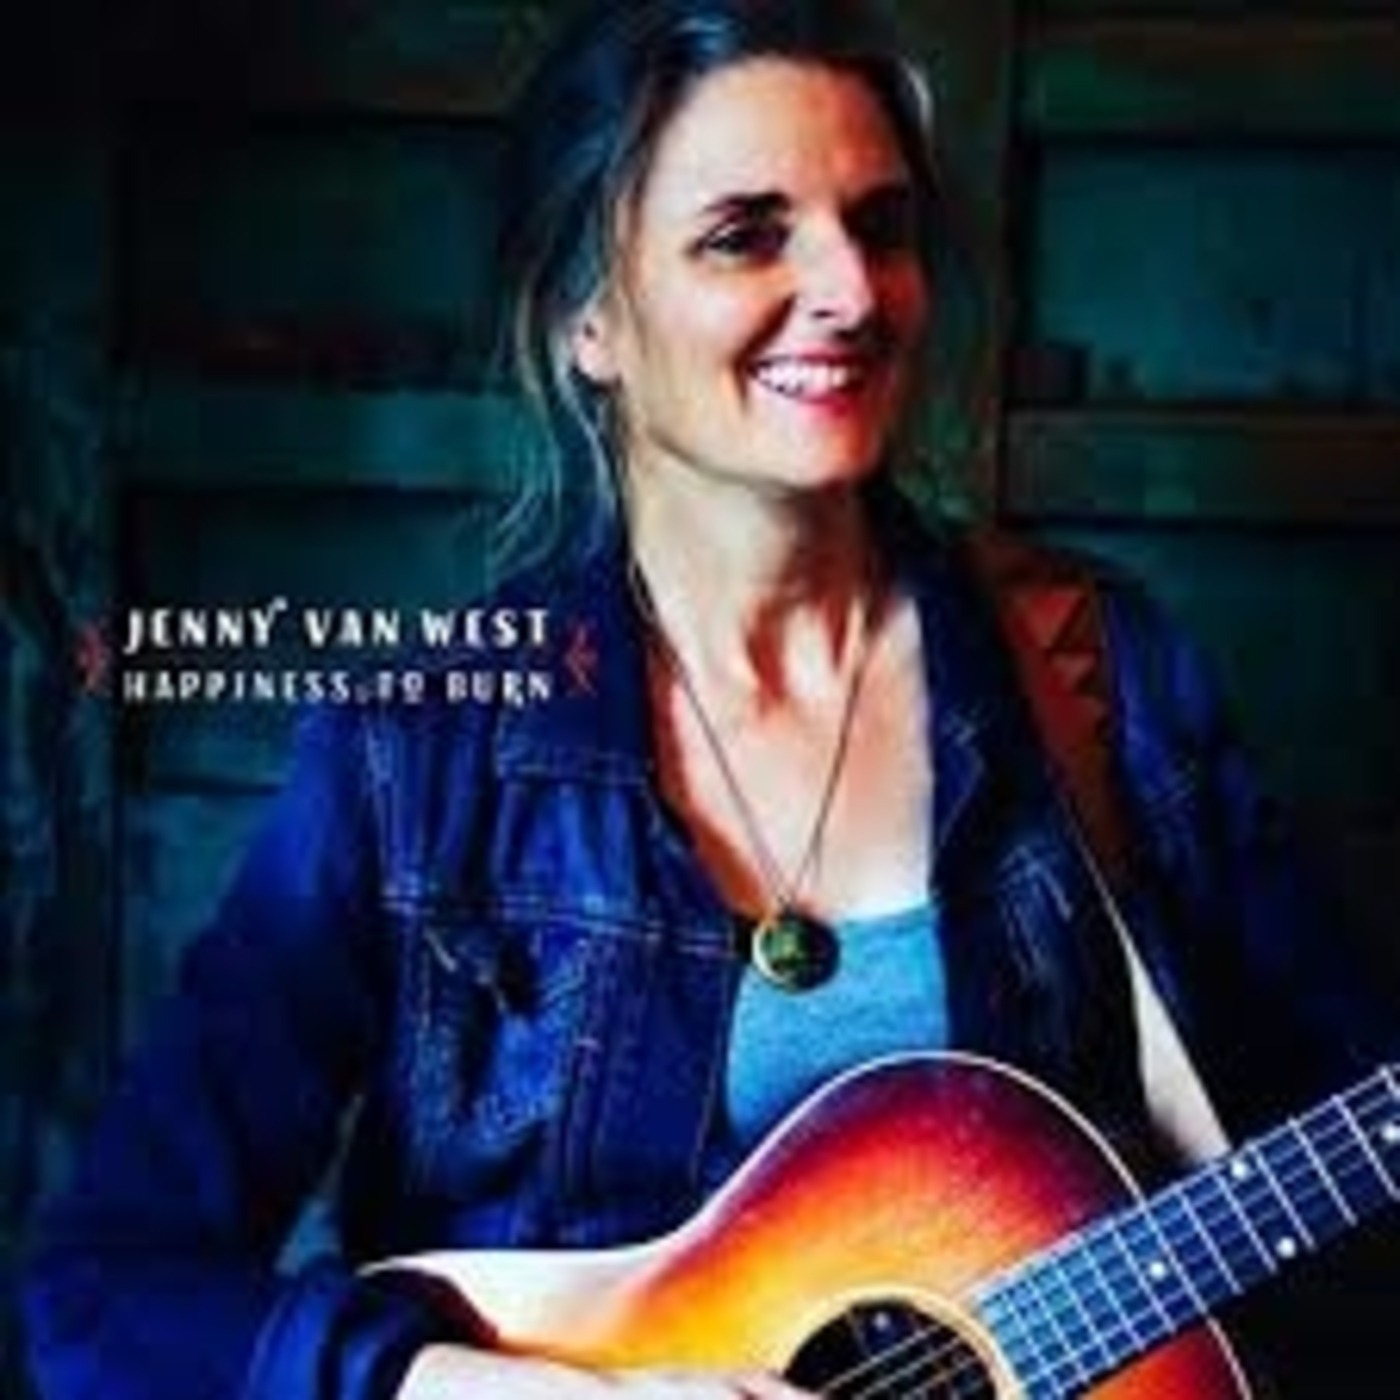 Happiness To Burn by Jenny Van West